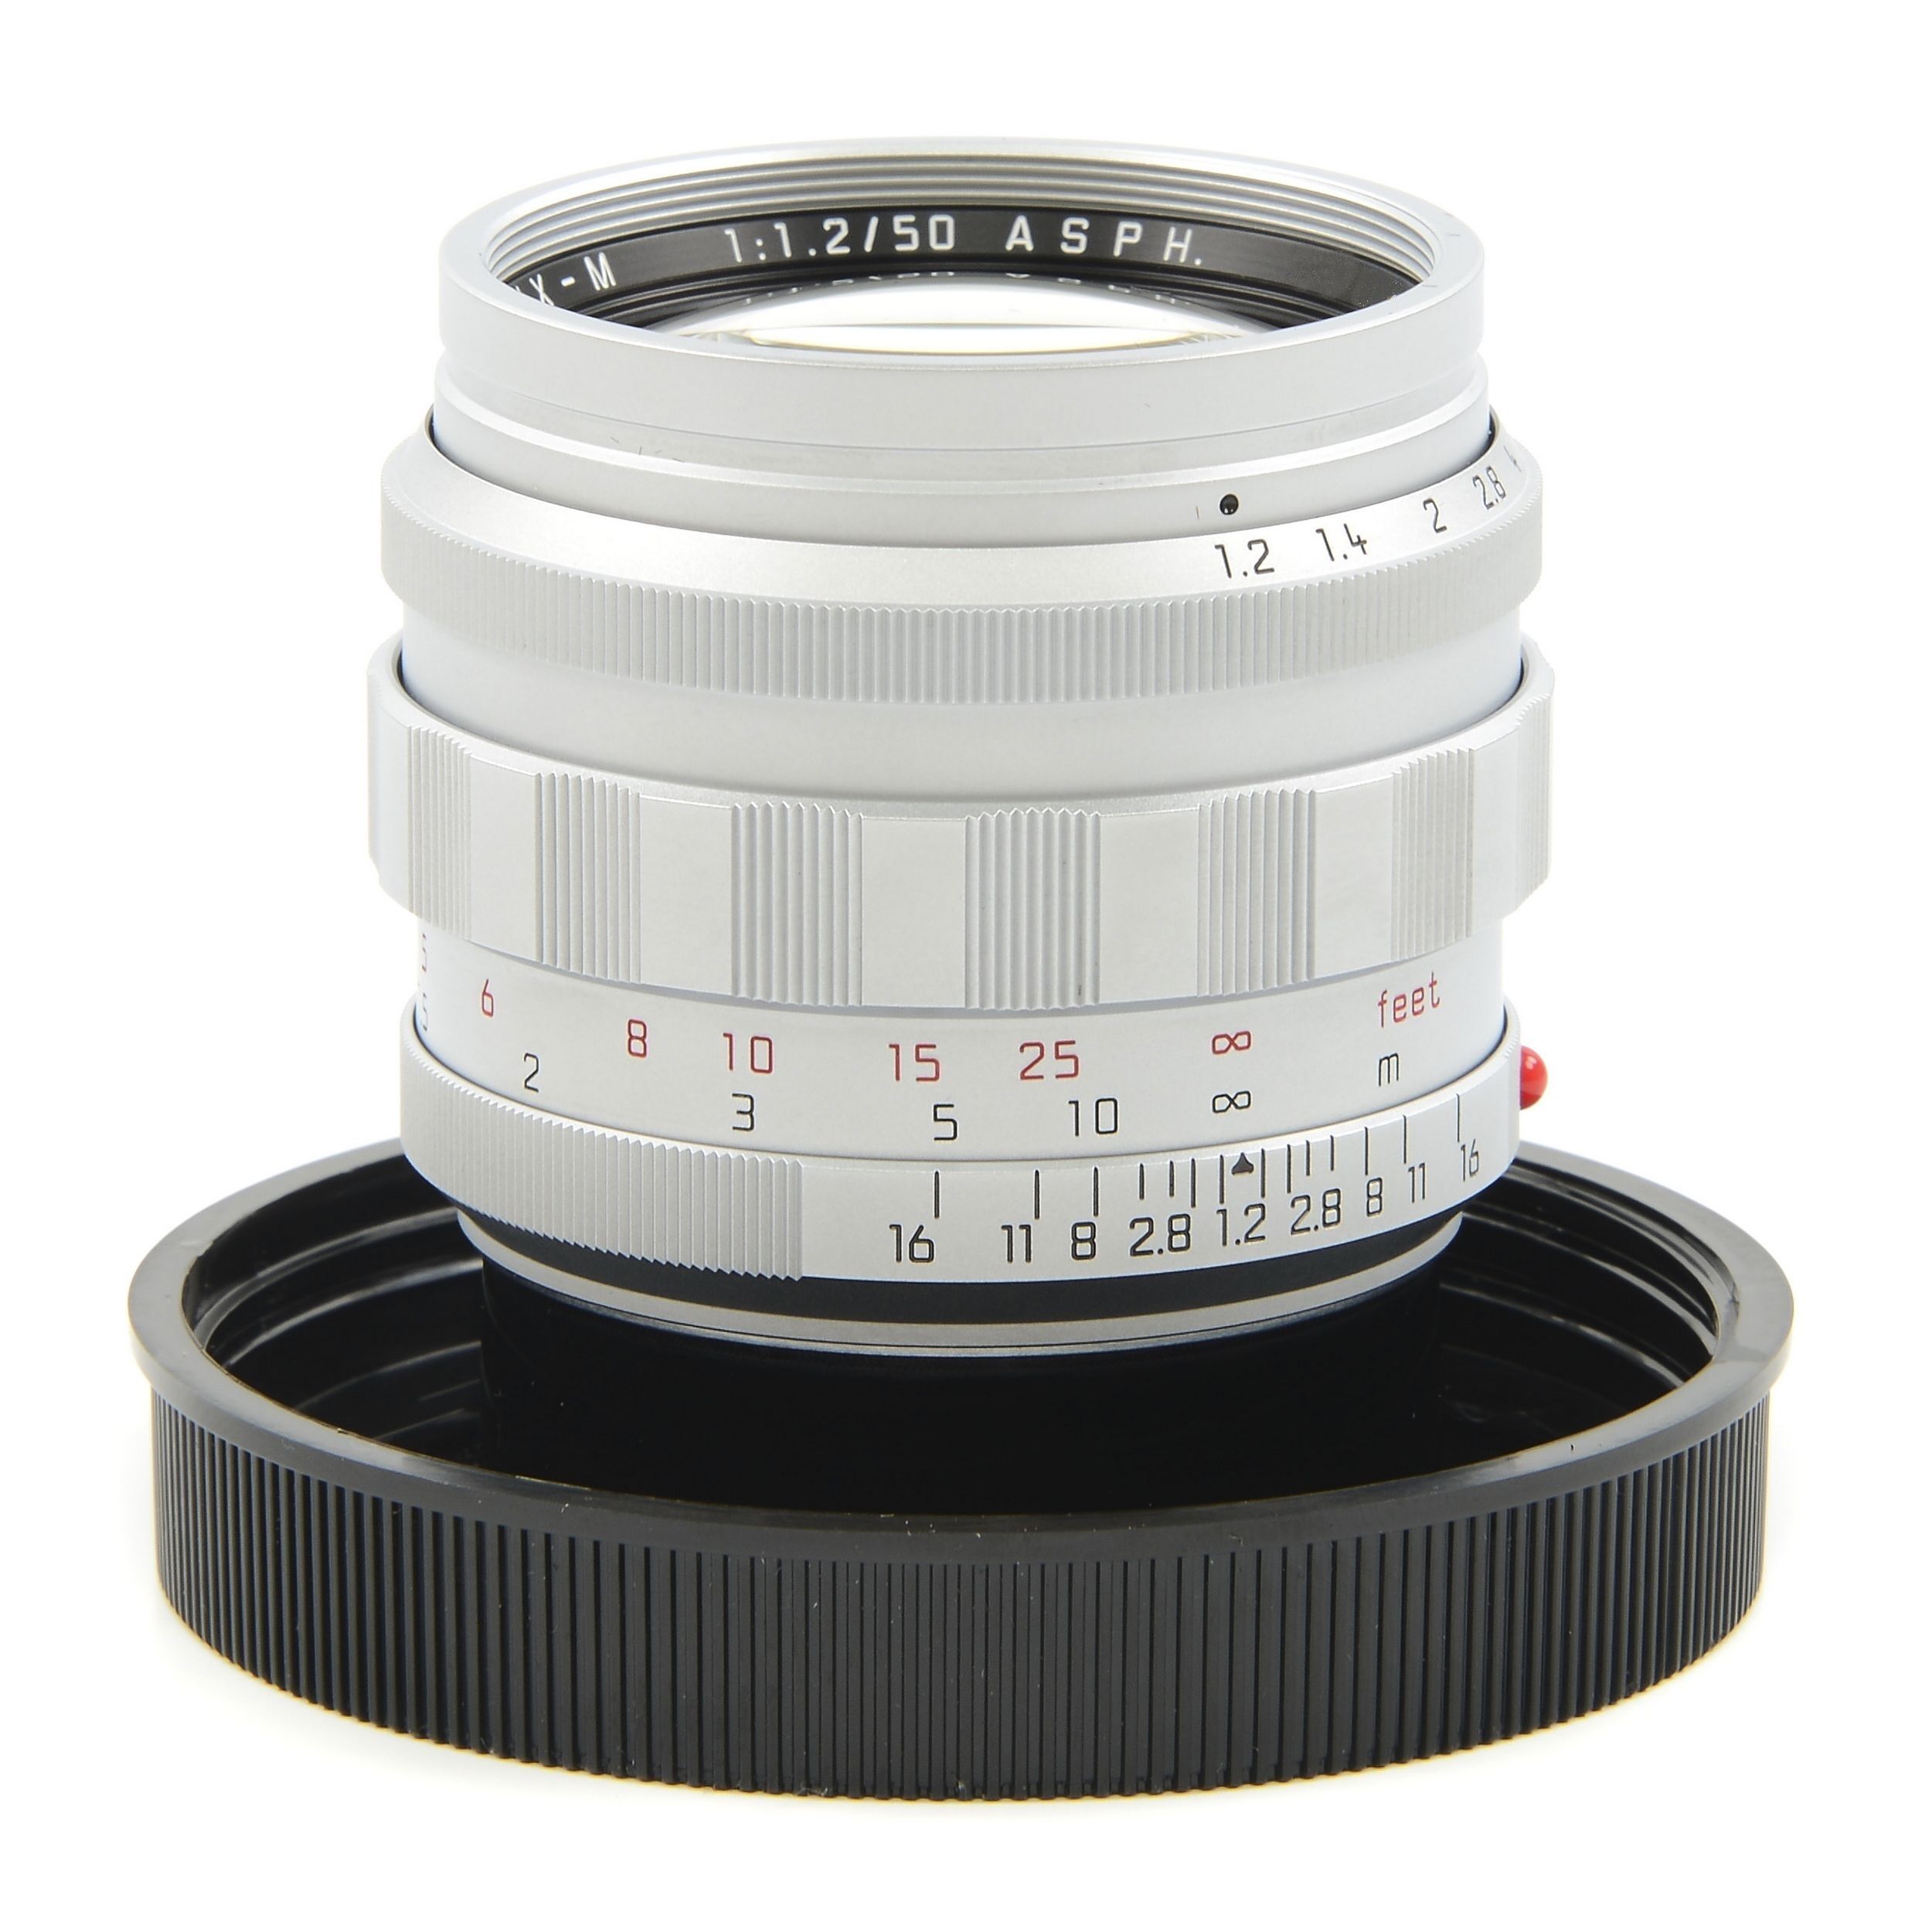 LEICA MP HISTORICA 1975-2020 SET 50MM F1.2 NOCTILUX SILVER MATCHING NUMBER #3422